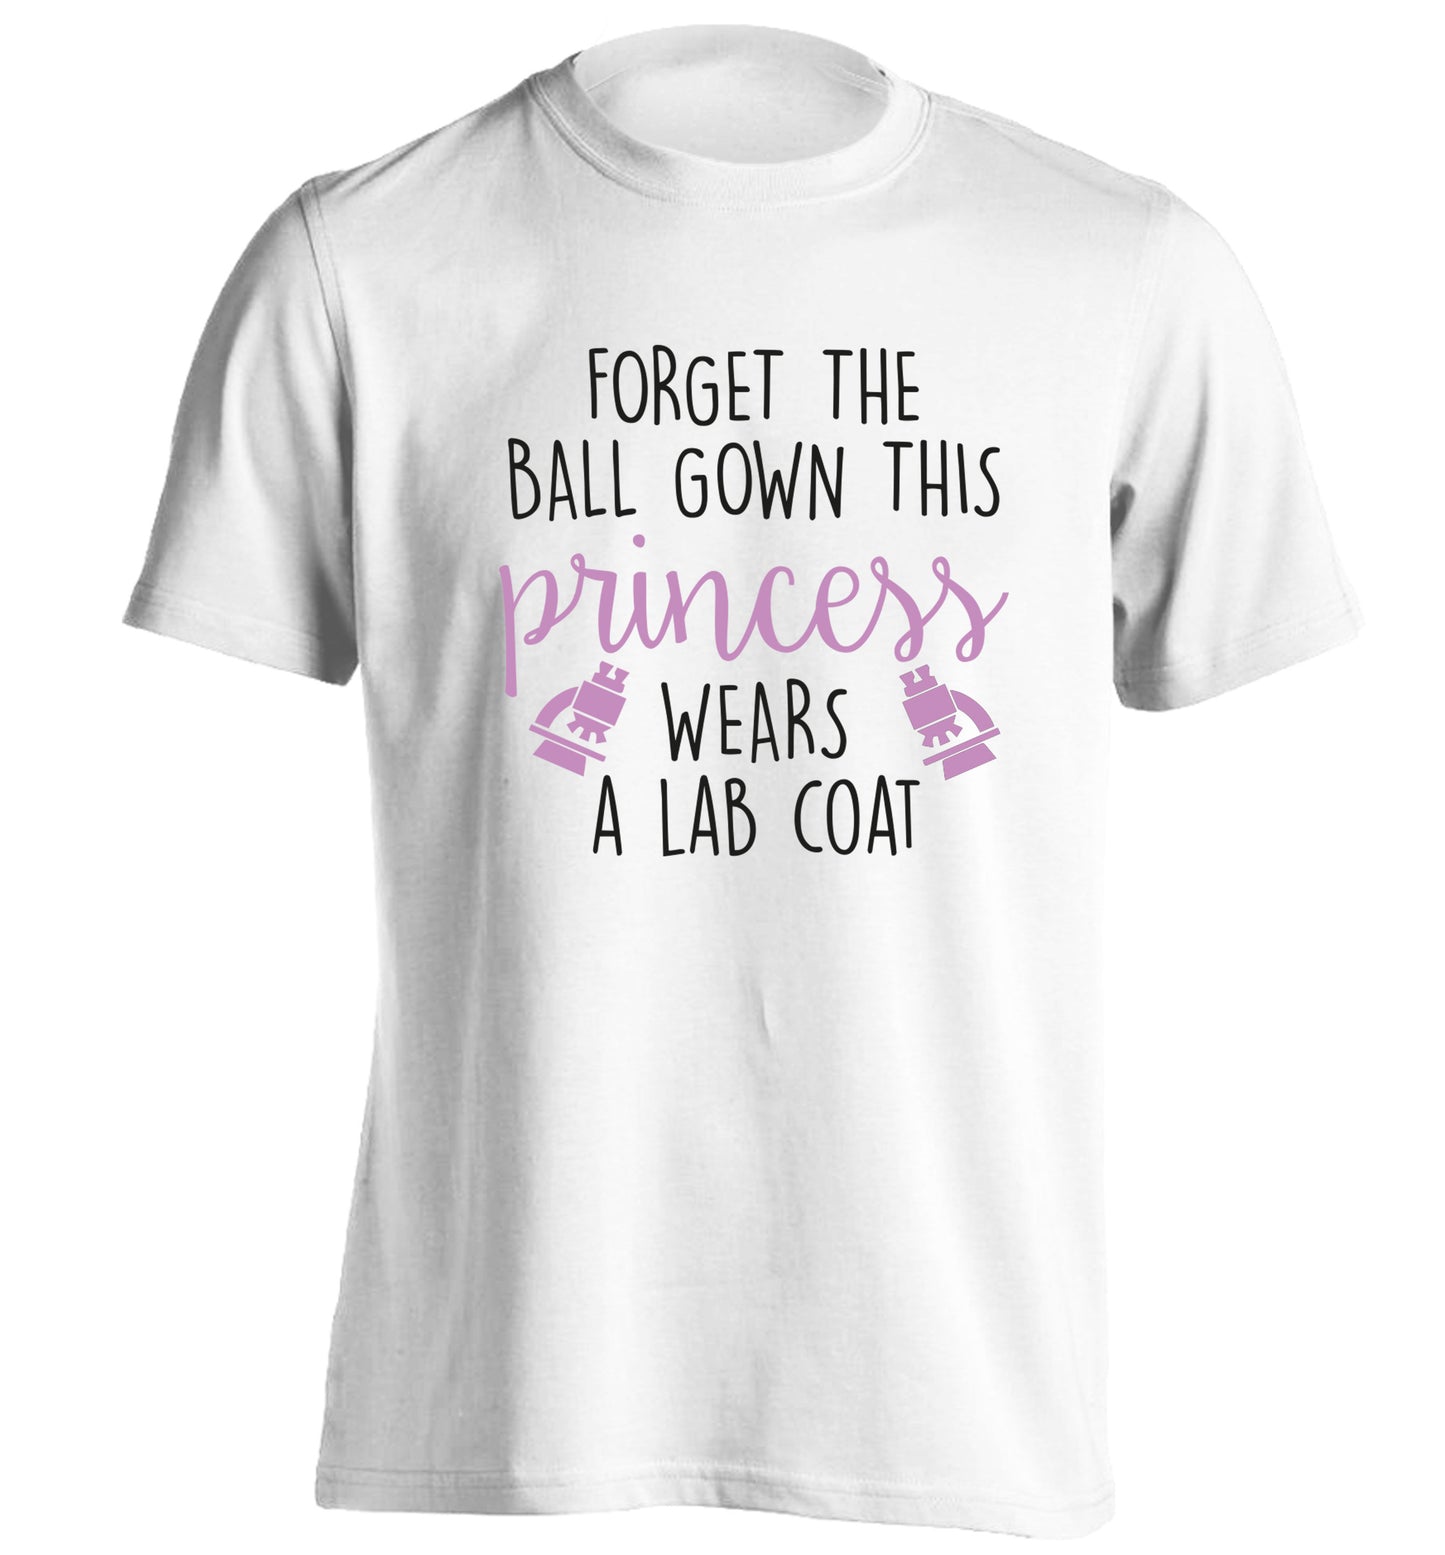 Forget the ball gown this princess wears a lab coat adults unisex white Tshirt 2XL